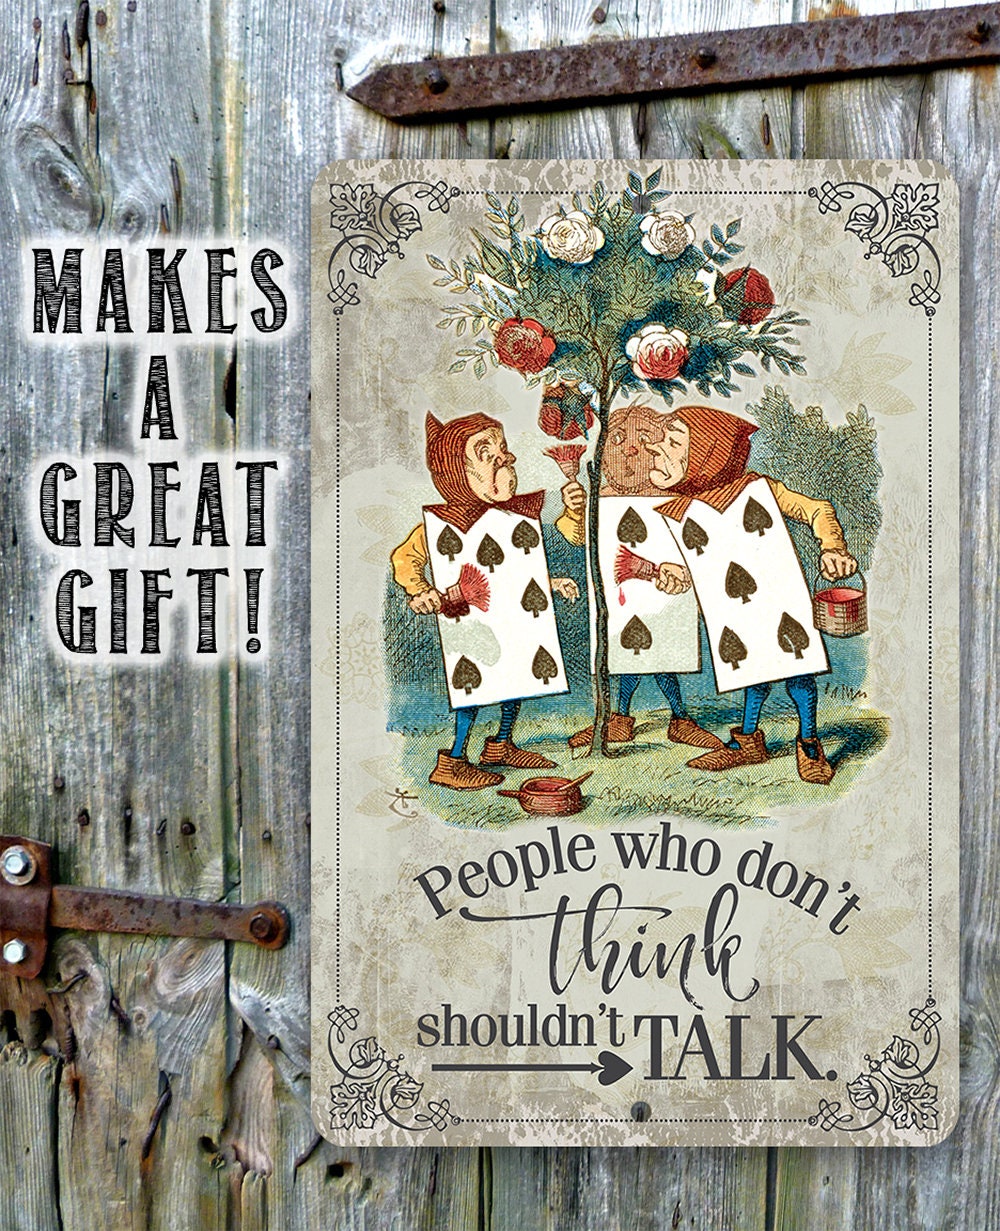 Alice in Wonderland - People Who Don't Think Shouldn't Talk - 8" x 12" or 12" x 18" Aluminum Tin Awesome Metal Poster Lone Star Art 